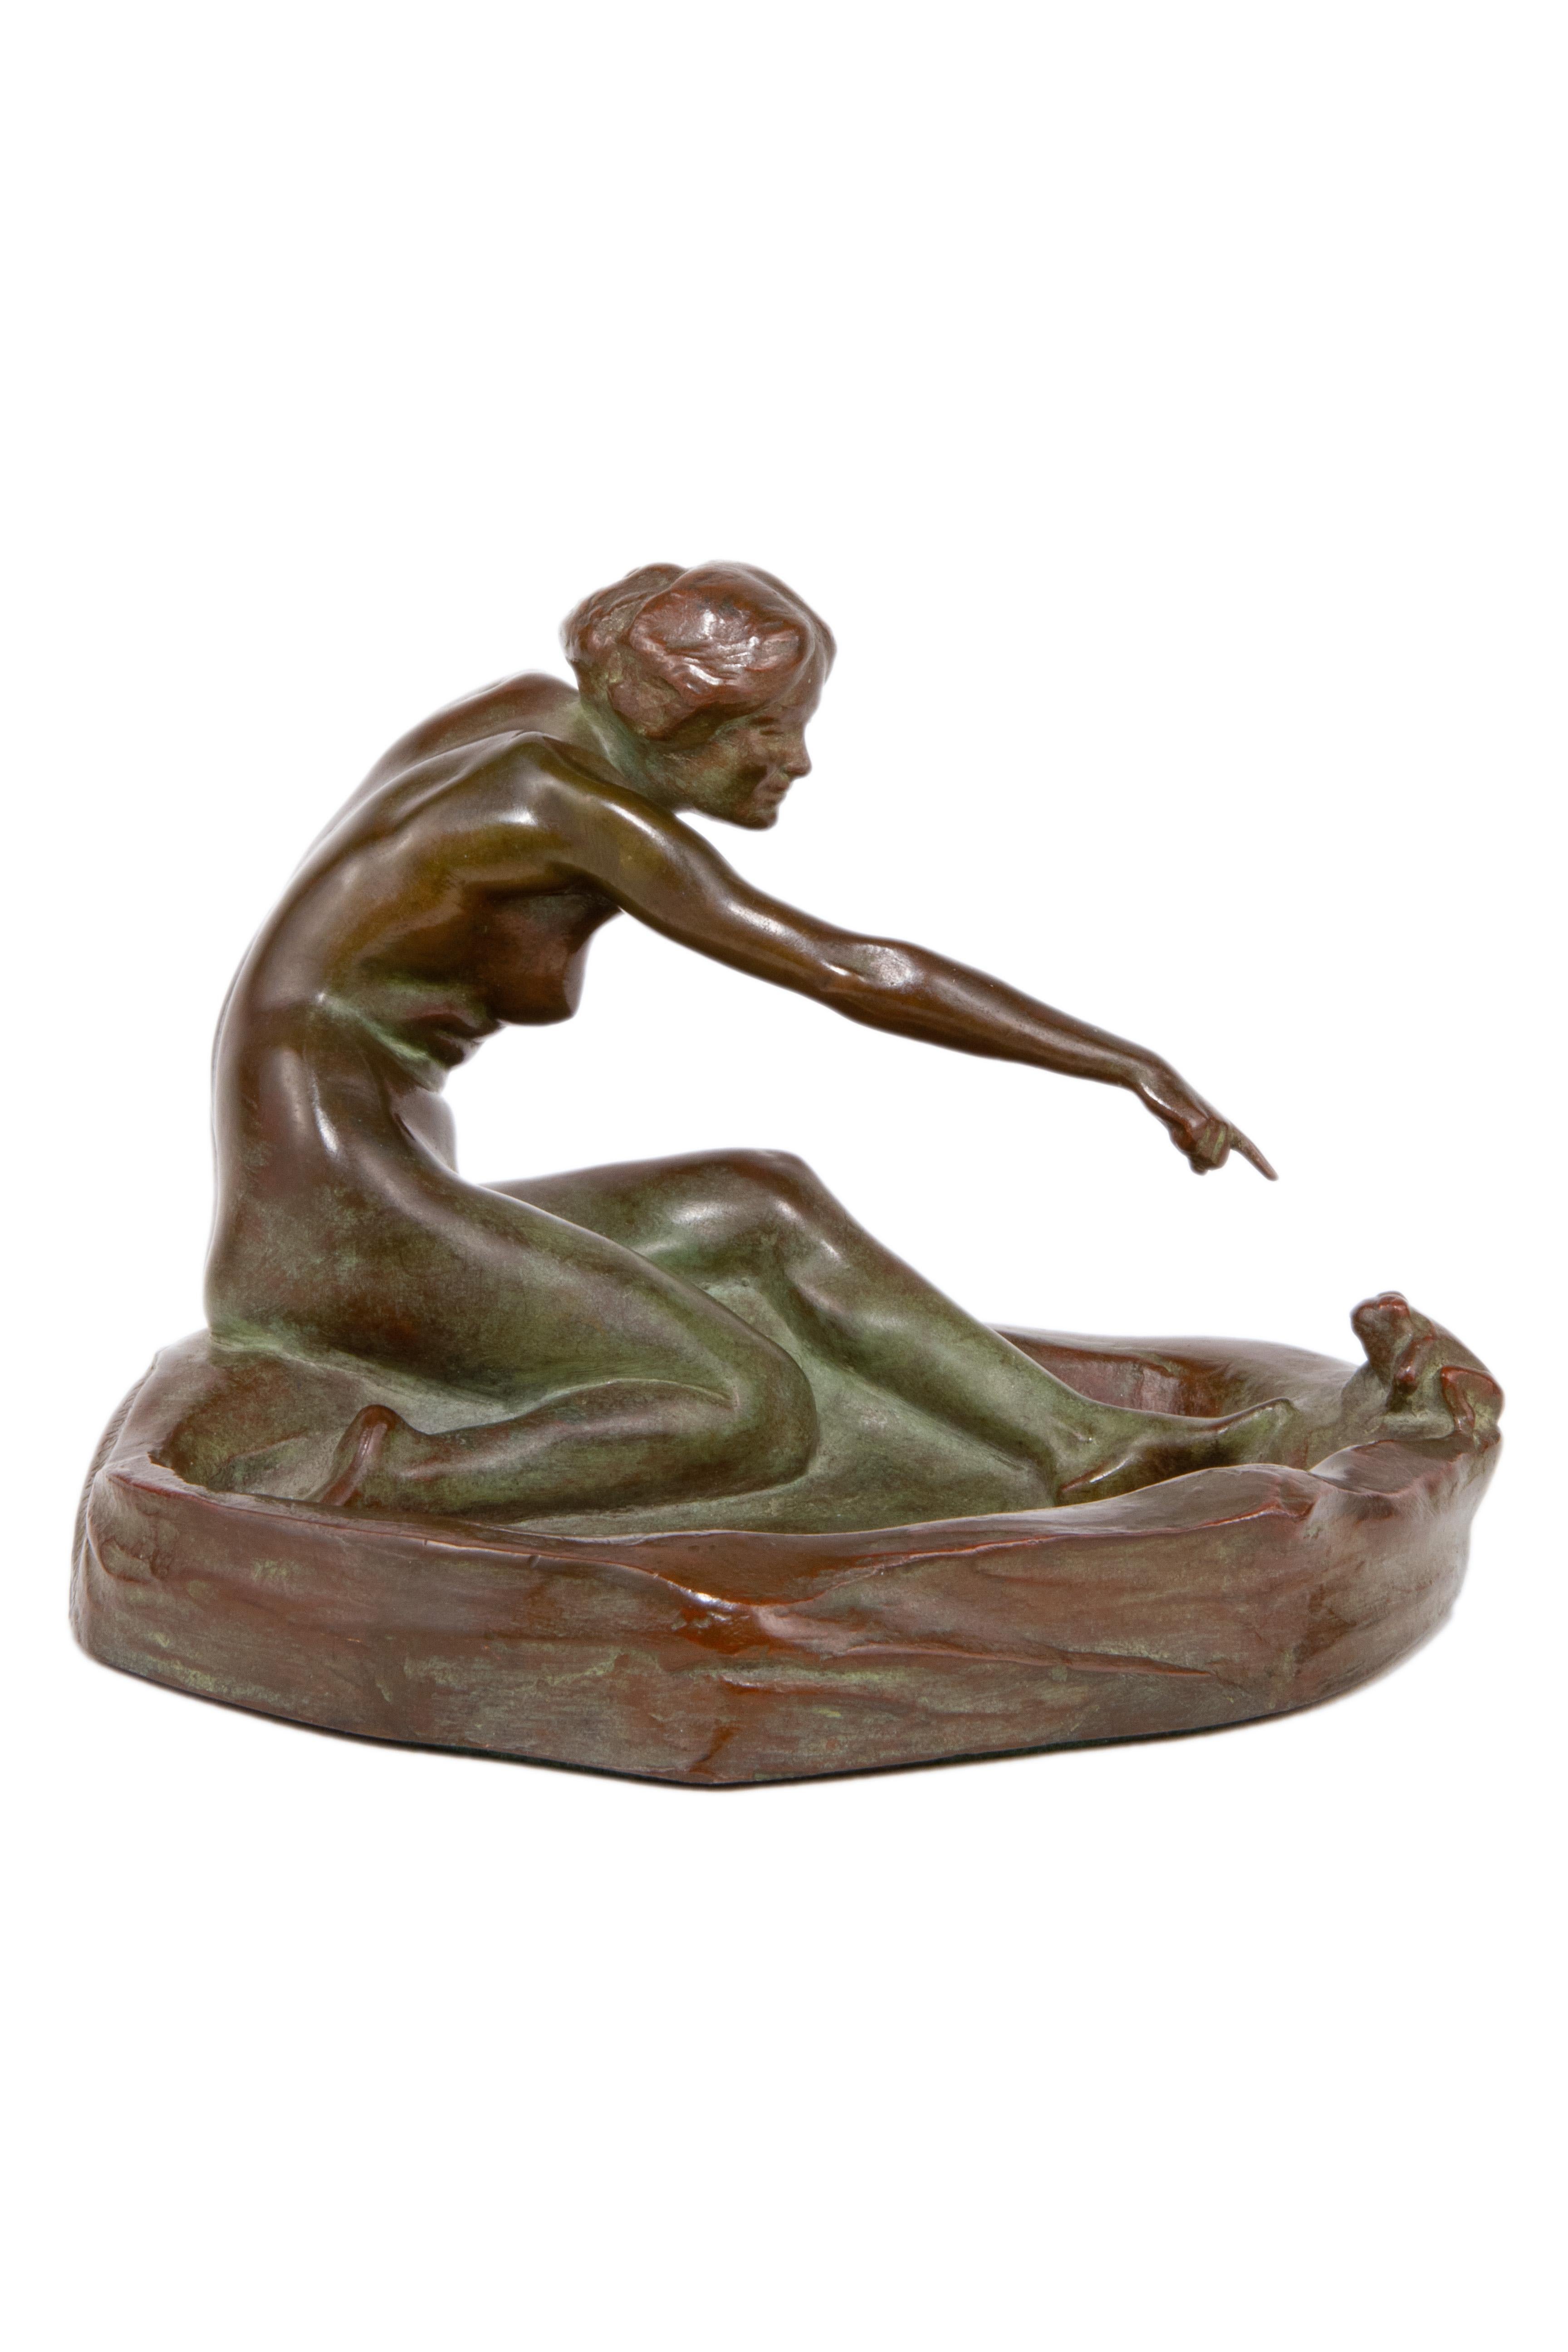 Girl with Frog American Art Nouveau Sculpture by, Harriet Whitney Frishmuth In Good Condition In Englewood, NJ